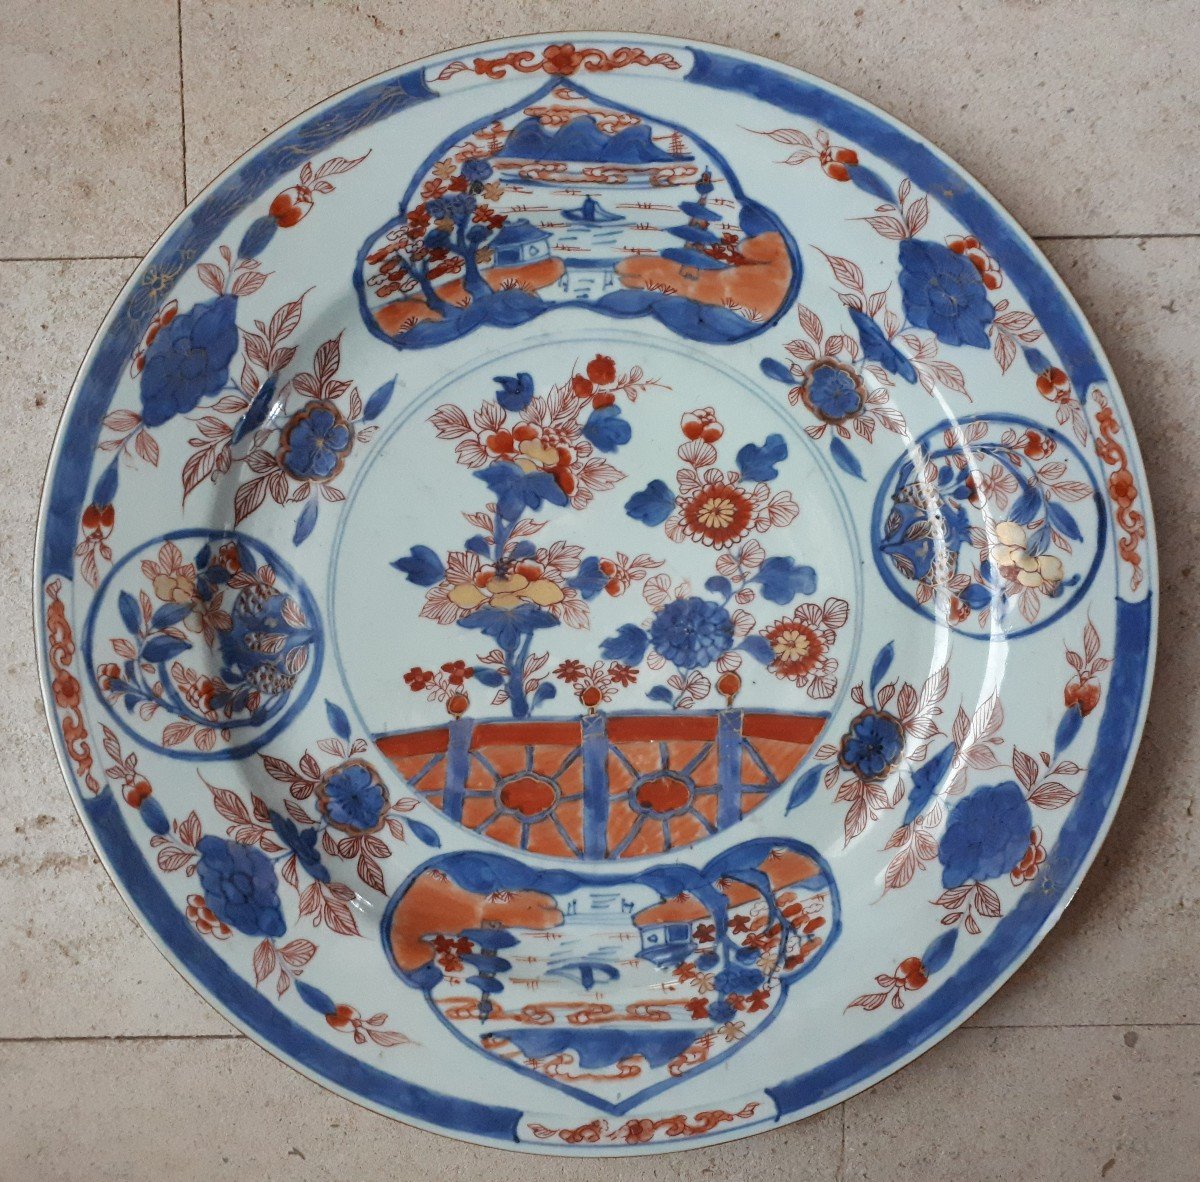 Plat Chinois d'Epoque Kangxi, Chine Dynastie Qing